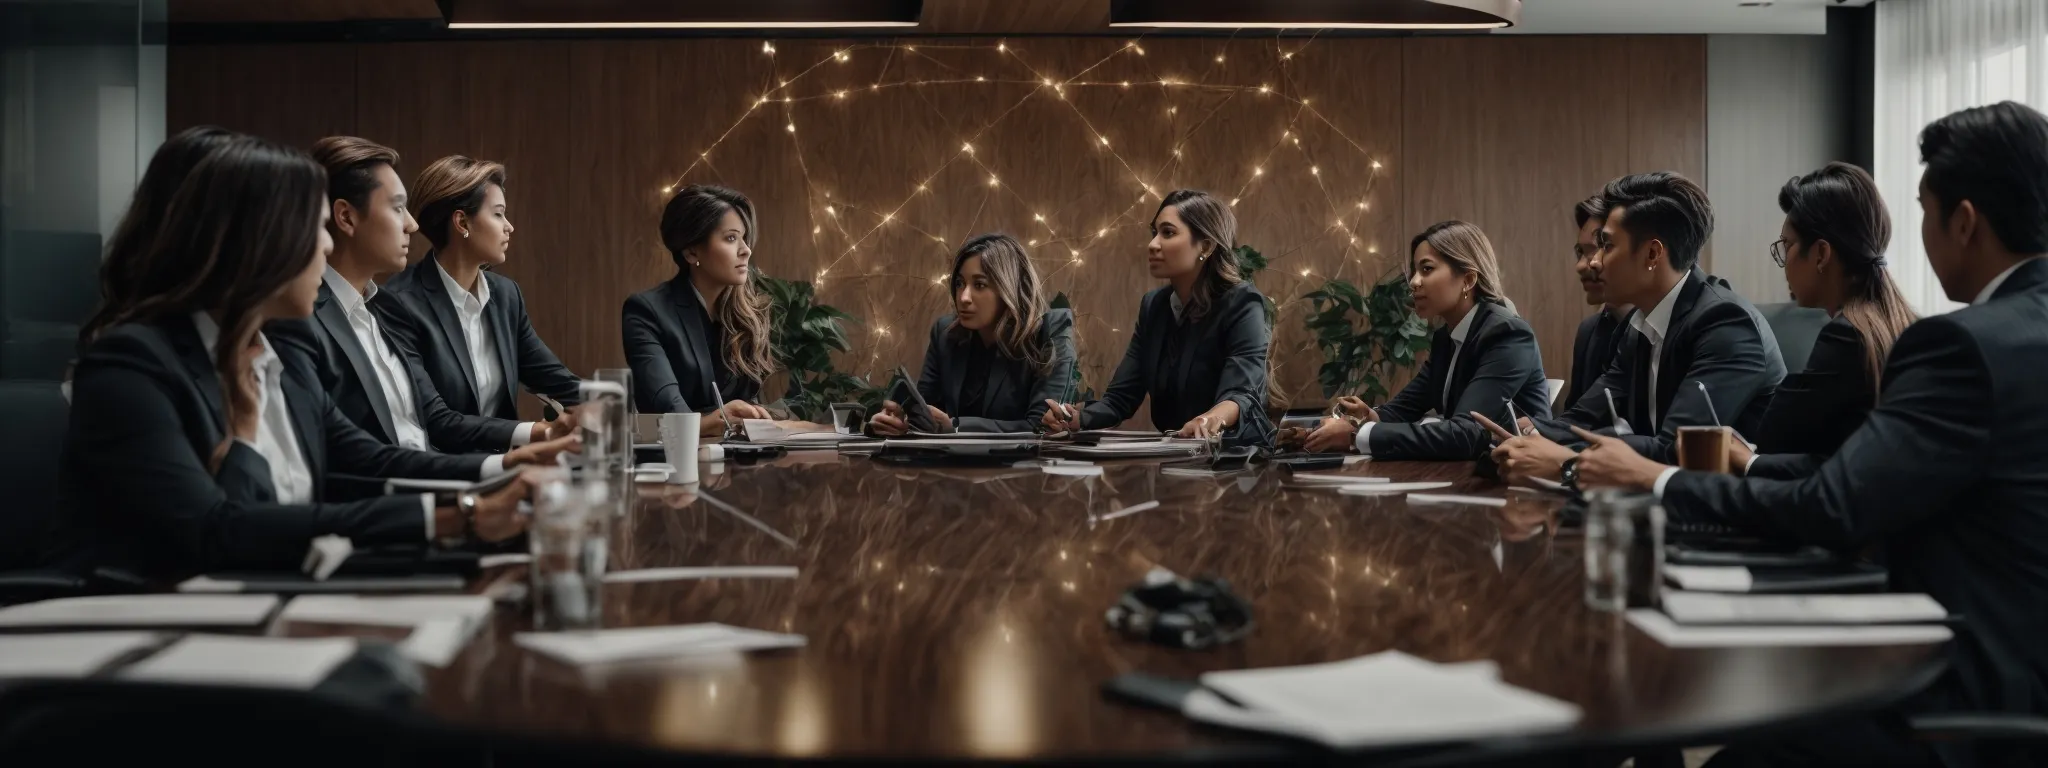 a team of marketing professionals collaborating around a conference table, with a clear vision of digital growth strategies mapped out in front of them.